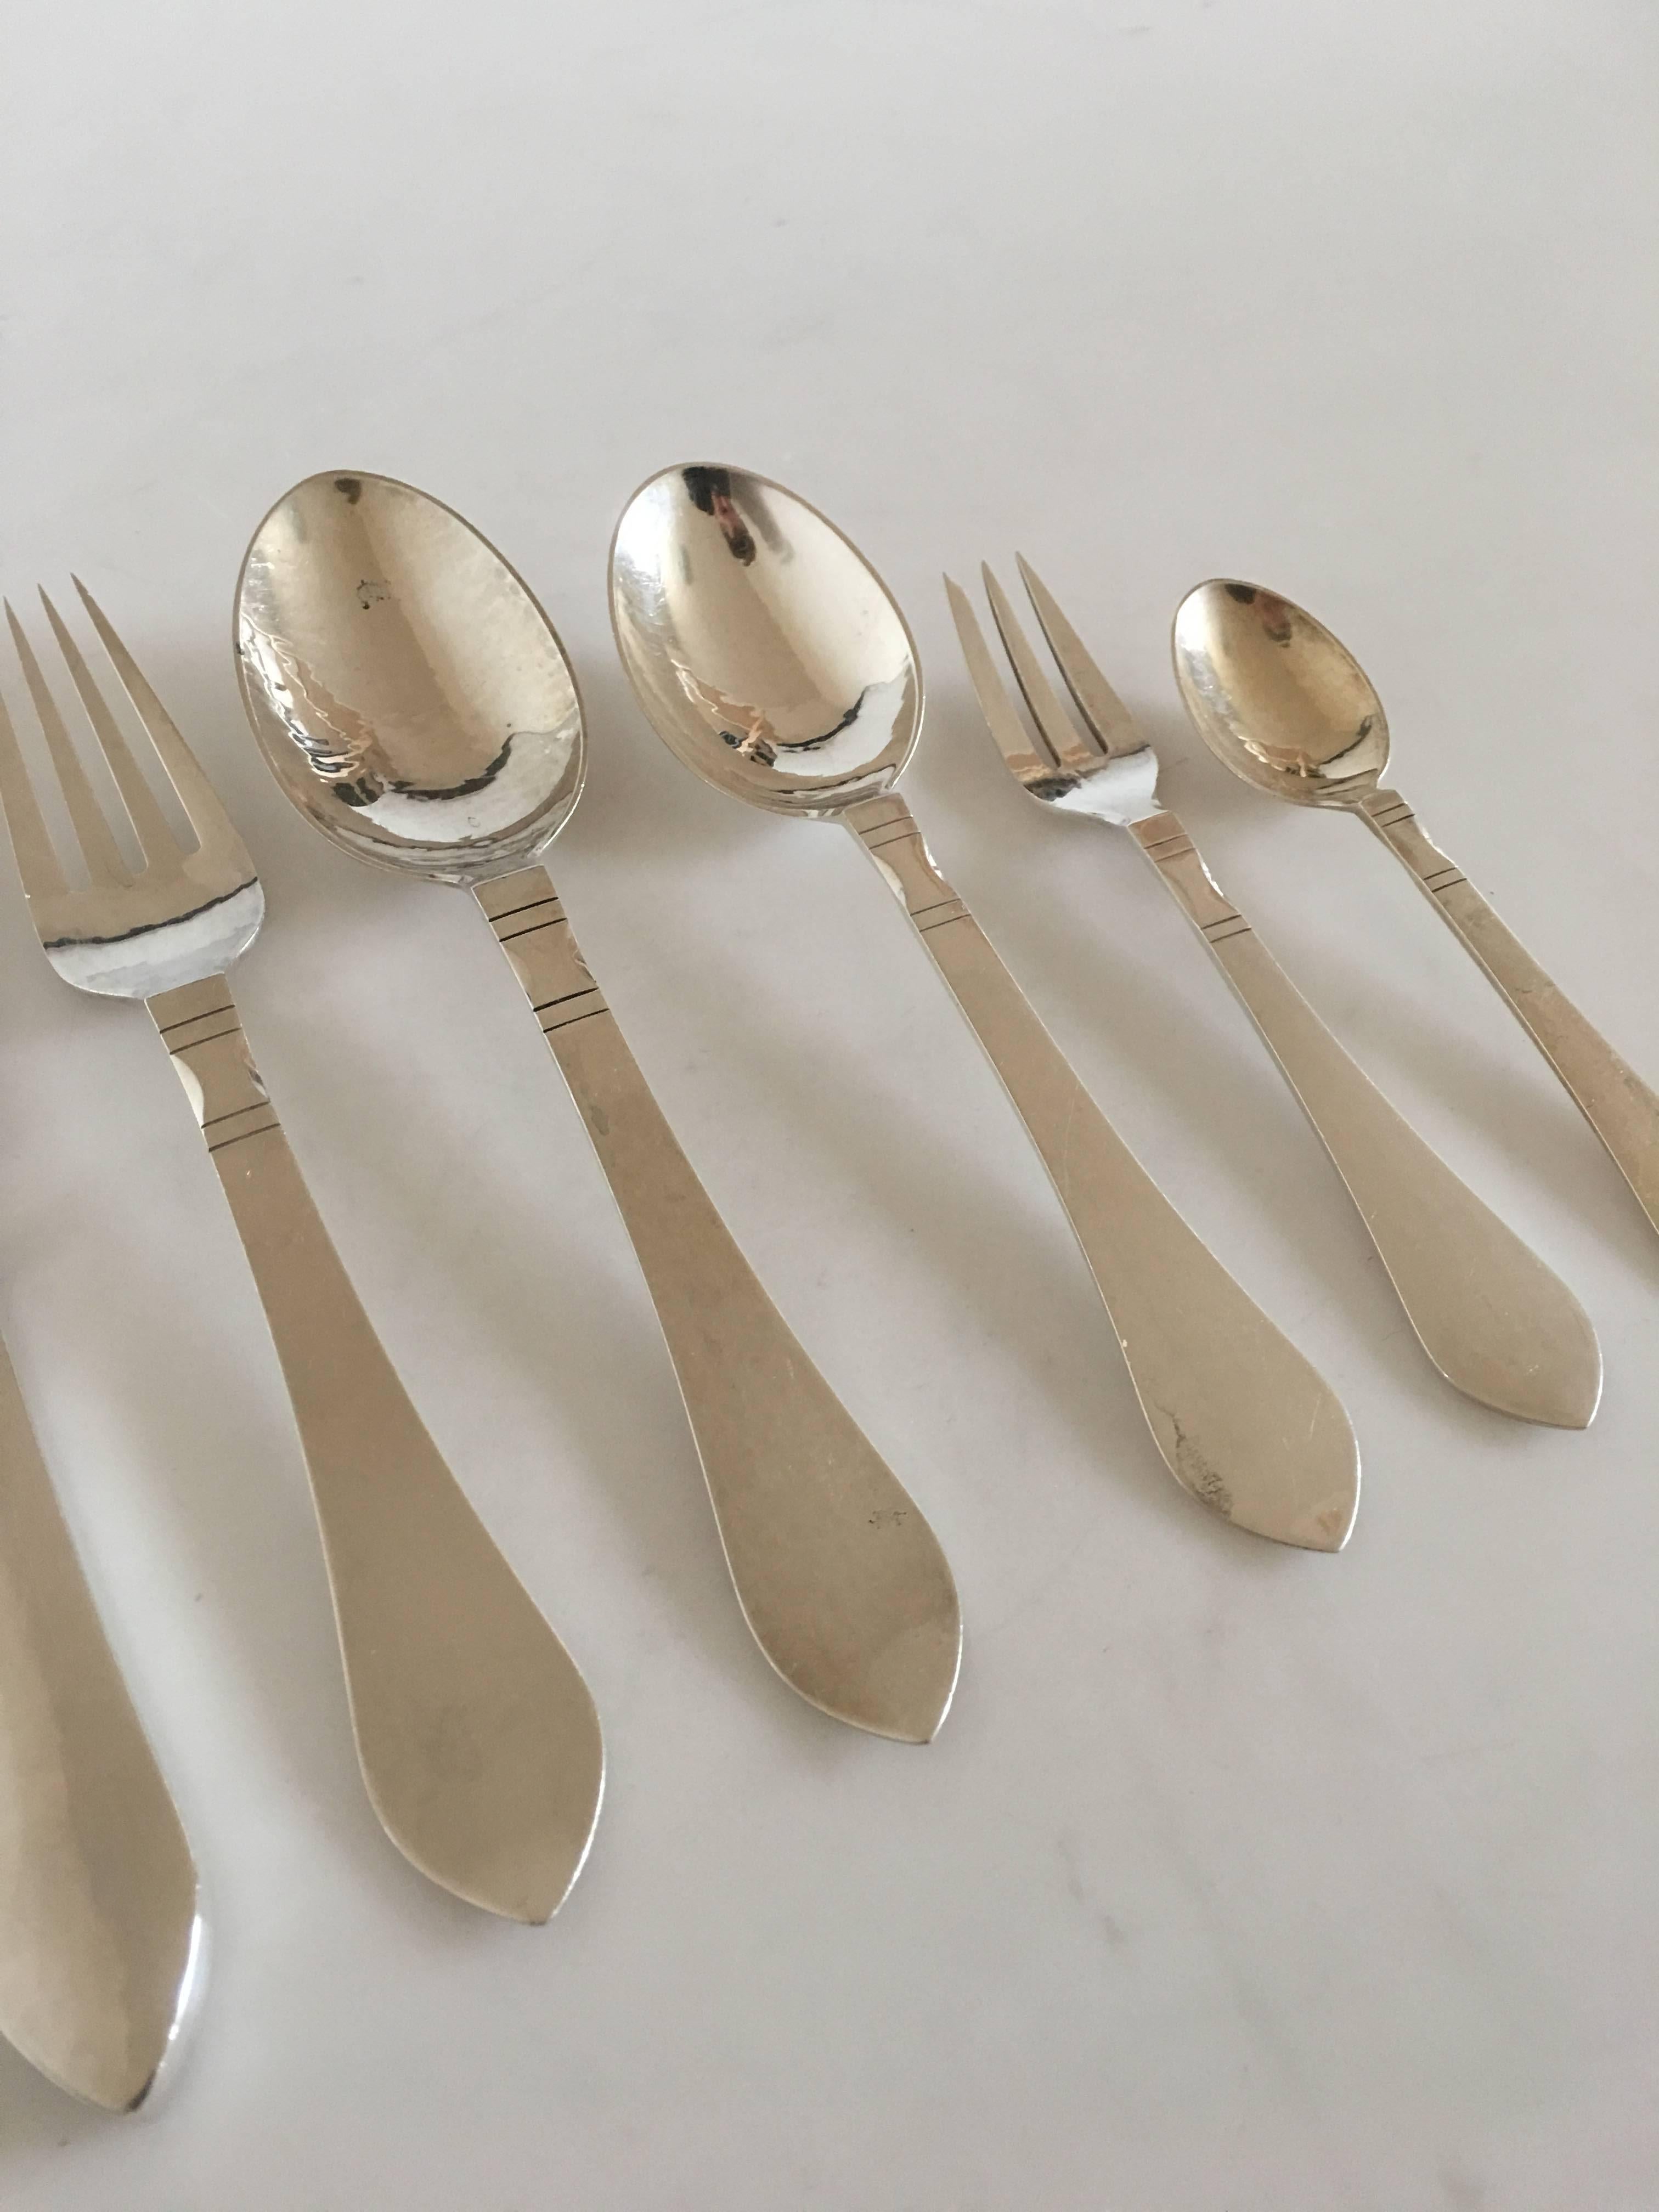 Georg Jensen sterling silver continental flatware set for 12 People. 65 pieces. The set consists of the following pieces: 

12 dinner knives with long handle 22.5 cm l (8 55/64